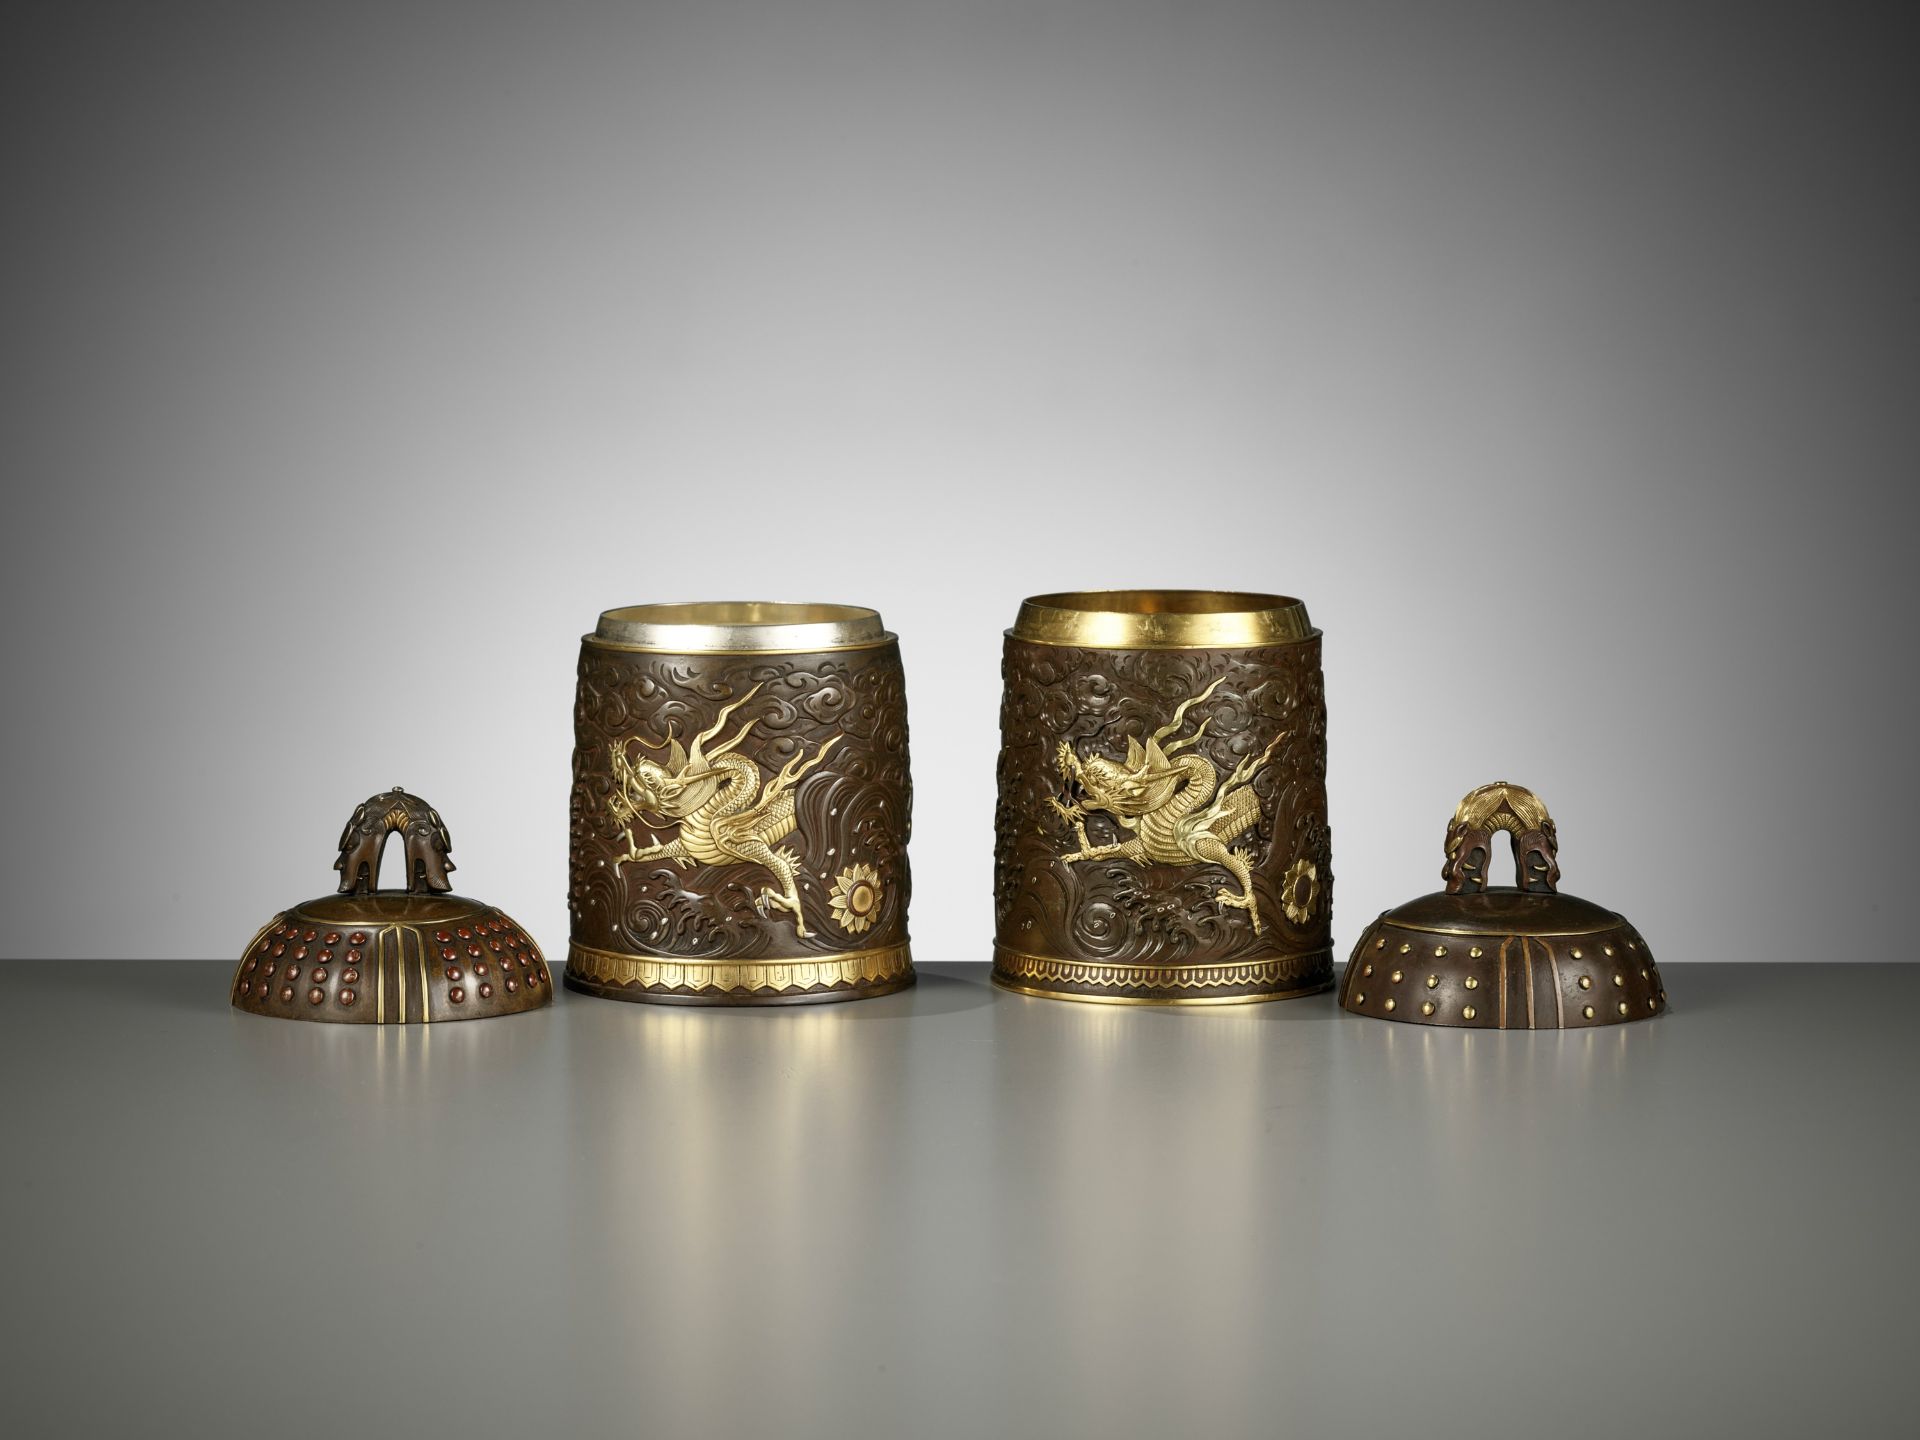 A MATCHED PAIR OF GOLD-INLAID BRONZE 'BUDDHIST TEMPLE BELL' KOGO, ONE BY MIYABE ATSUYOSHI - Image 9 of 15